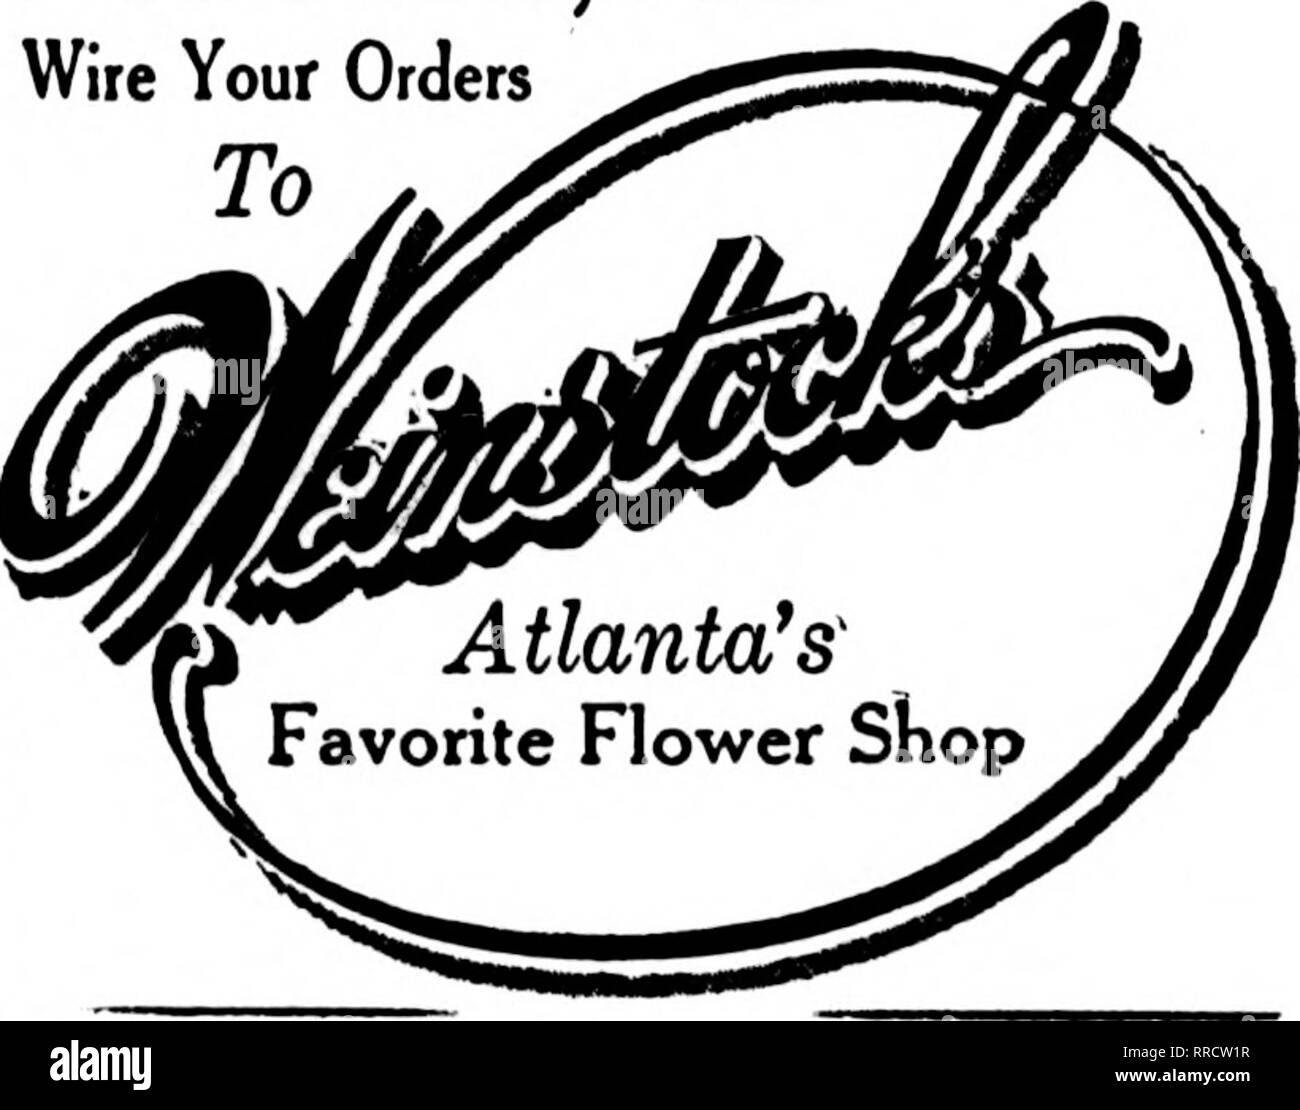 . Florists' review [microform]. Floriculture. Two Stores Members F. T. D. cve nnd Evecution Member Florists' Telenrapli Delivery to Send all MEMPHIS Orders THE FLOWER SHOP 61 Union Avenue MEMPHIS. TENNESSEE Memphis, Tenn. JOHNSON'S GREENHOUSES 161 MADISON AVE. Established 1888 Mfiiaber FloriBts' Telegraph Delivery Ass'n ATLANTA, GA. Lawrence Floral G). Supply Flowers for all Occasions in Georgia Member . T. D. ALBANY, GA. &quot; Jack Smith Greenhouse Co., Florid HAGERSTOWN, MD. HENRY A. HESTER &amp; SONS Members Florists' Telegraph Delivery Ass'n Mary Johnston, Florist Nee Paterson •i'il-'ia?  Stock Photo